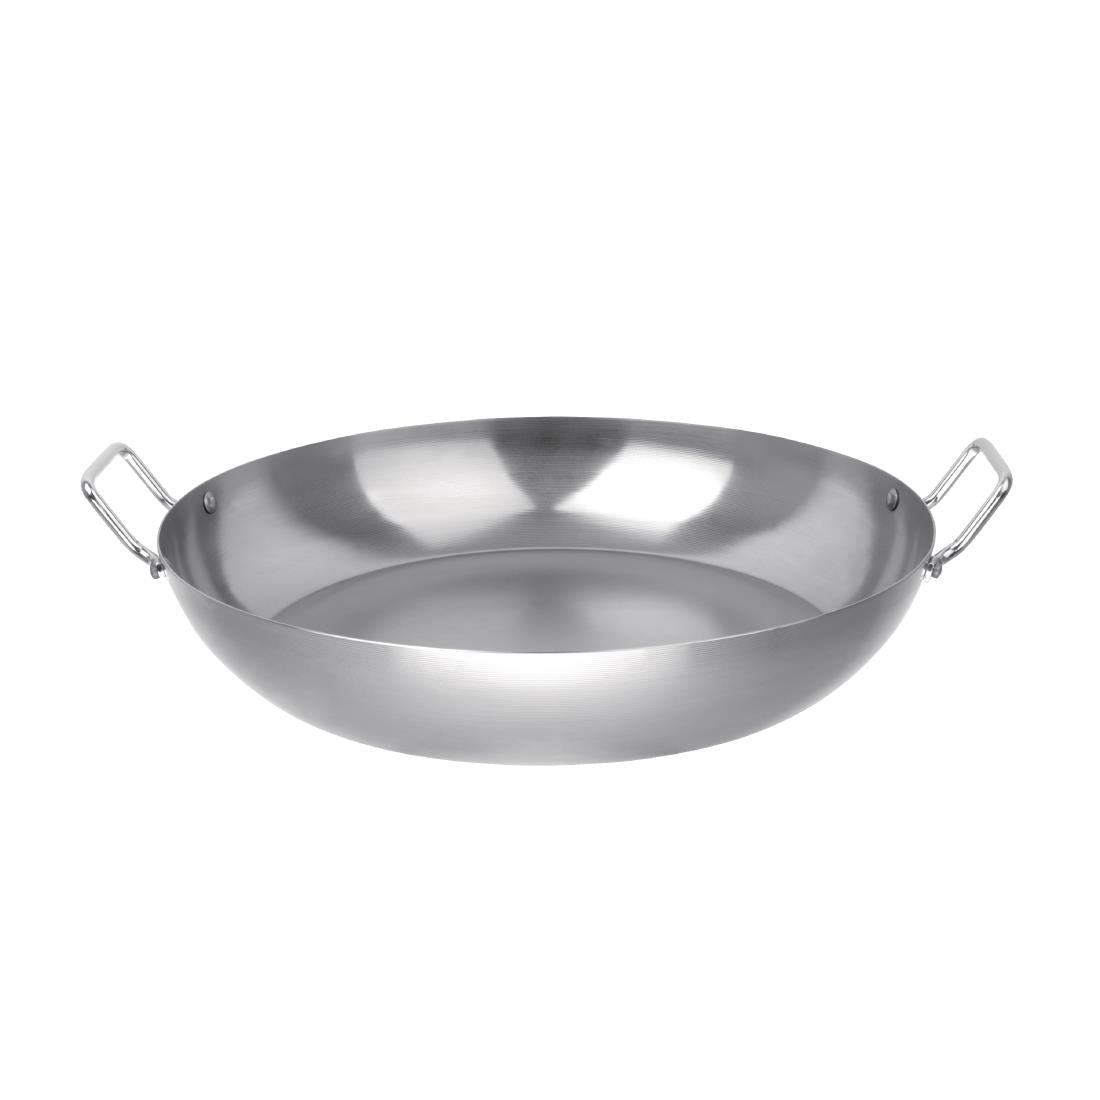 GD074 Vogue Carbon Steel Paella Pan 400mm JD Catering Equipment Solutions Ltd